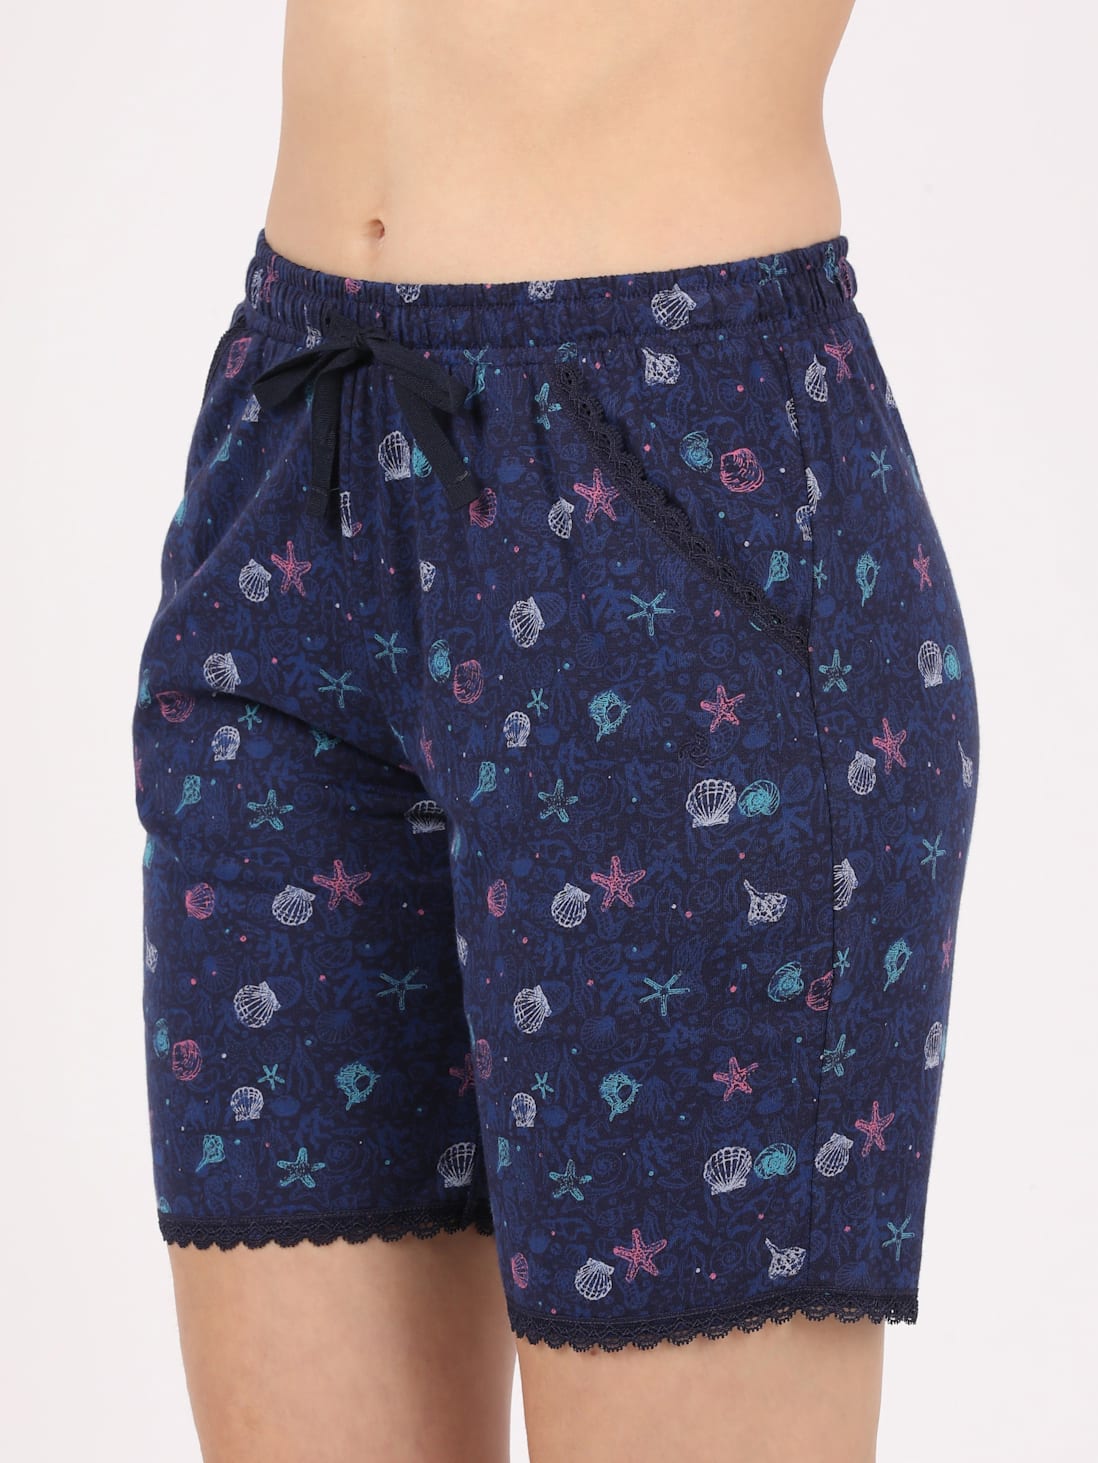 Buy Women's Micro Modal Cotton Relaxed Fit Printed Shorts with Lace ...